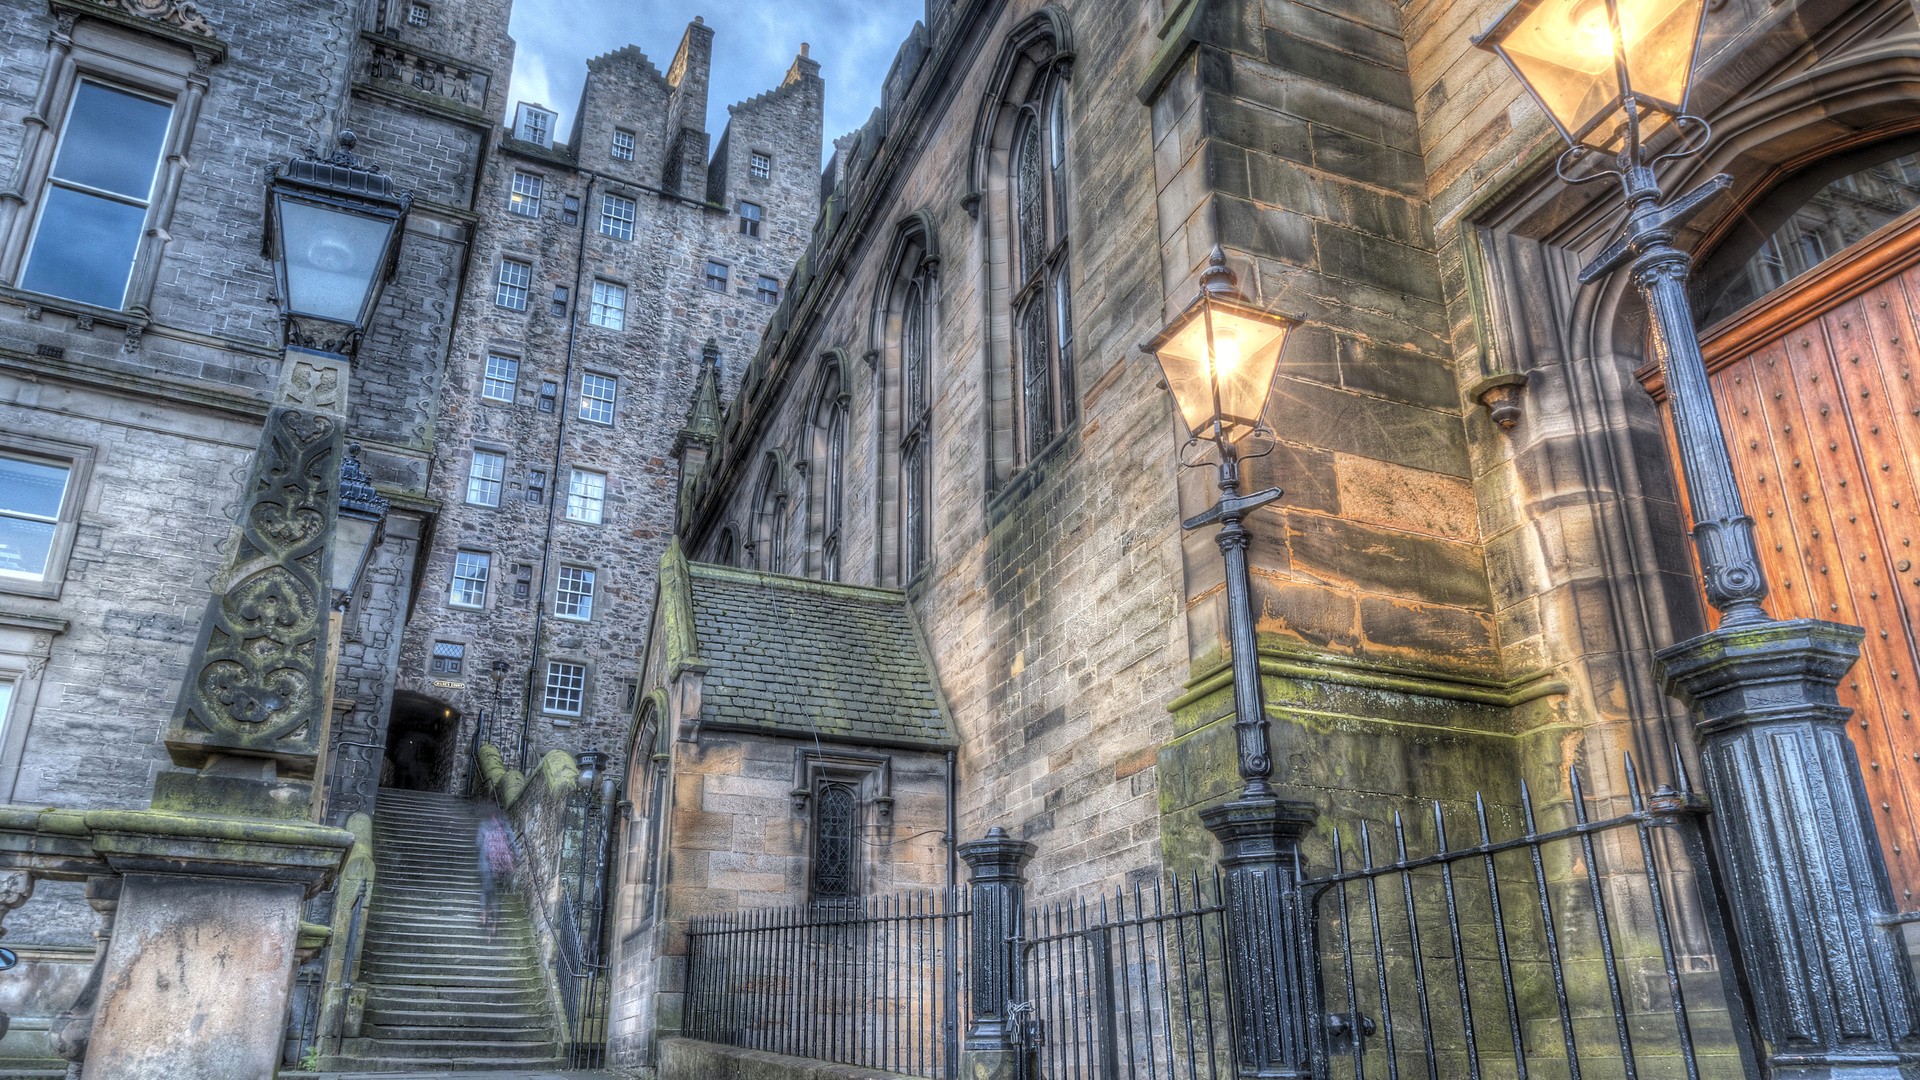 Architecture Building Old Building Edinburgh Scotland UK Street Stairs Lamp Evening HDR Ancient Hist 1920x1080